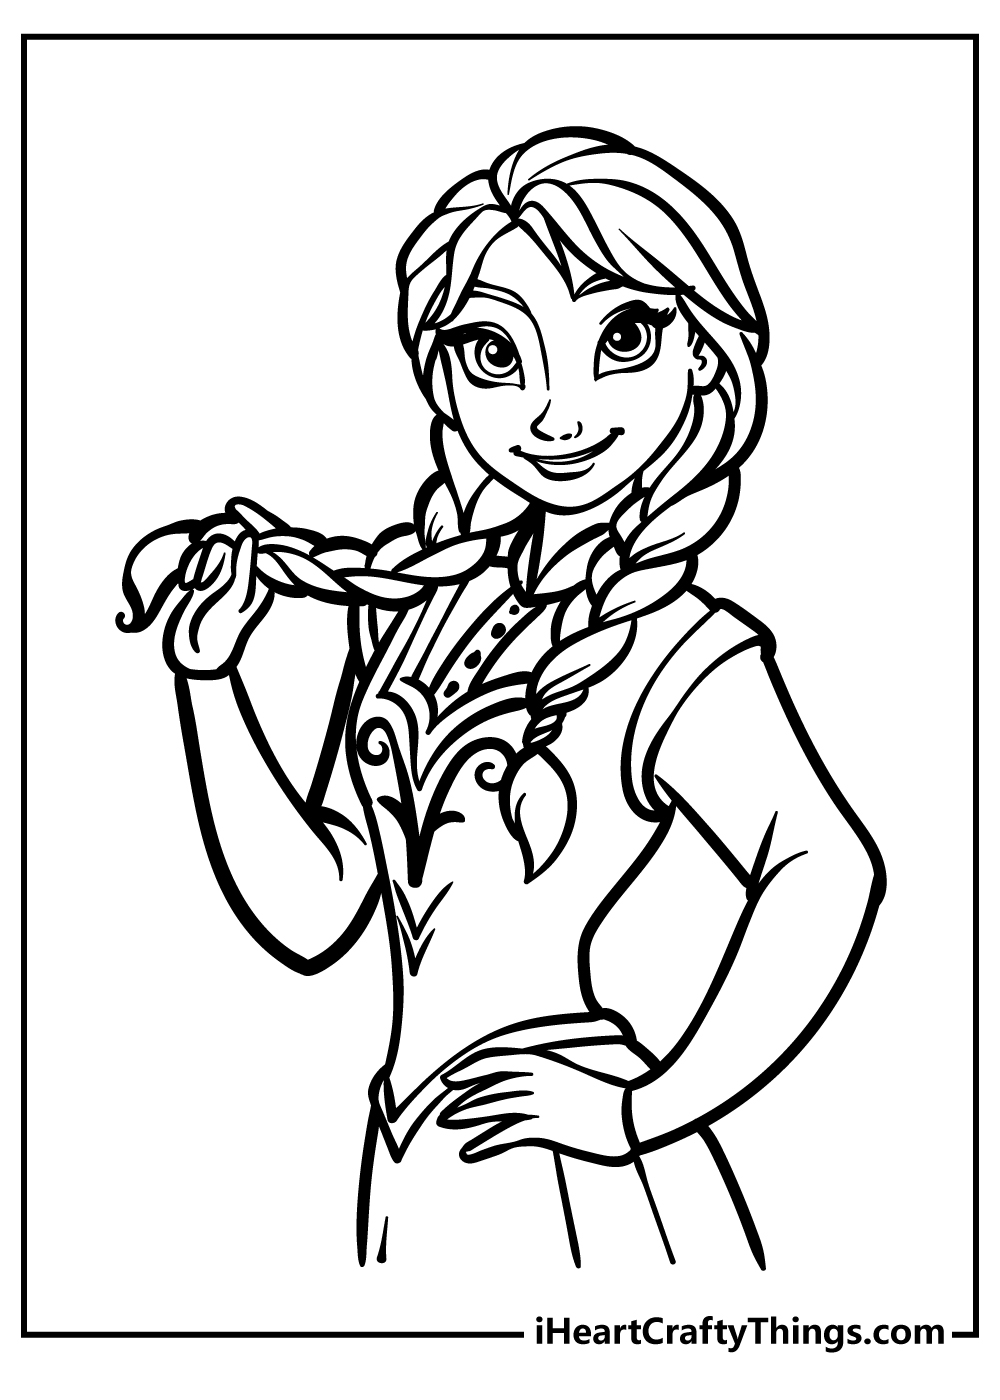 Frozen Coloring Sheet for children free download